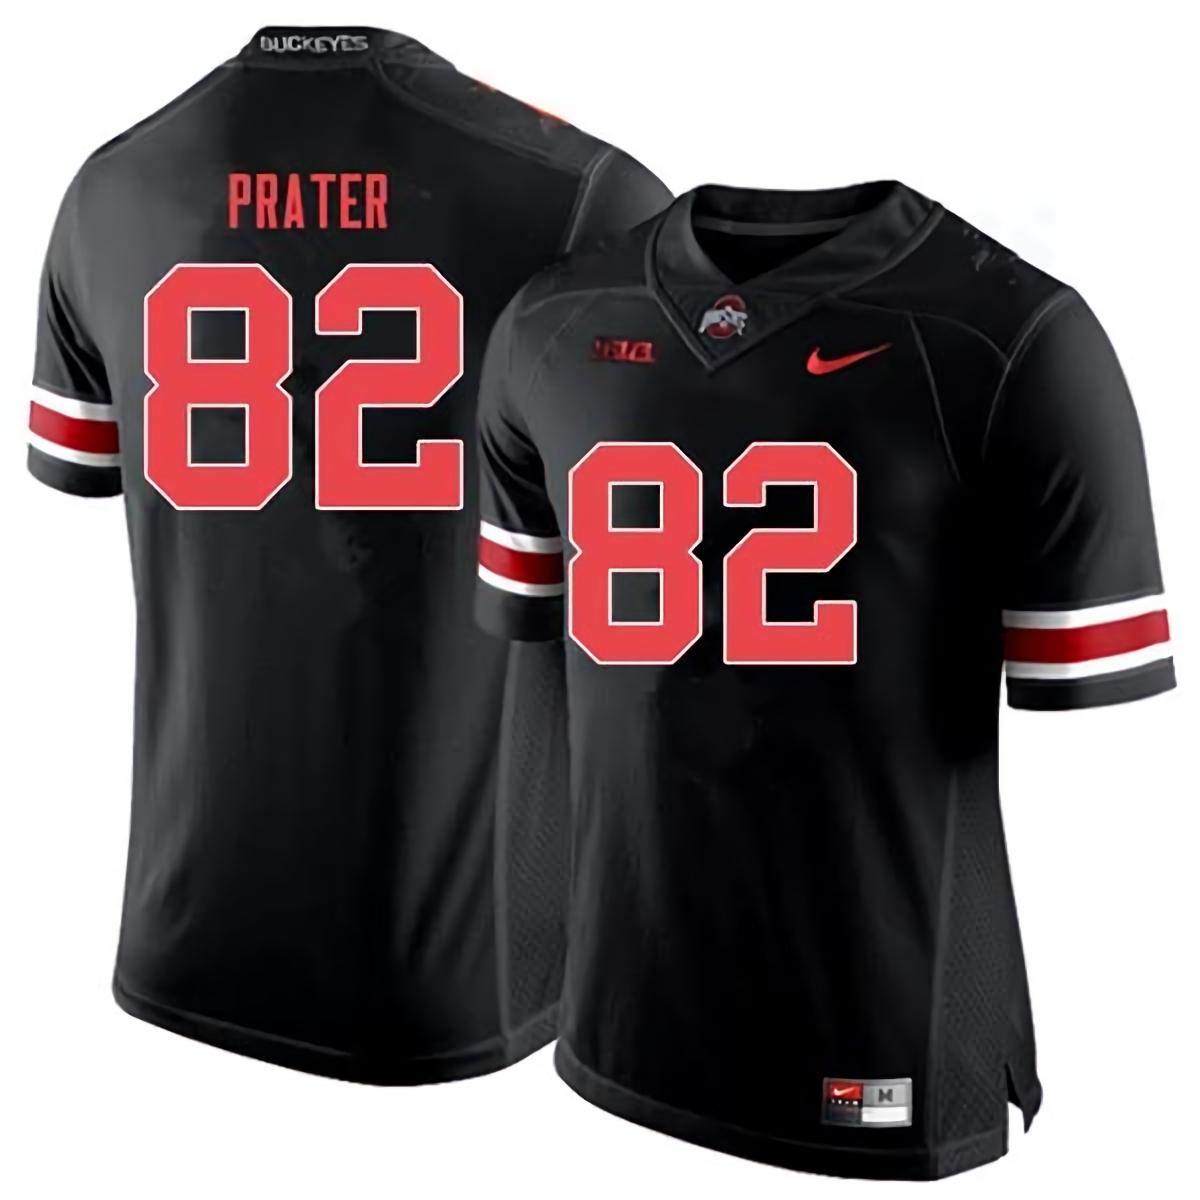 Garyn Prater Ohio State Buckeyes Men's NCAA #82 Nike Black Out College Stitched Football Jersey JCH7656OU